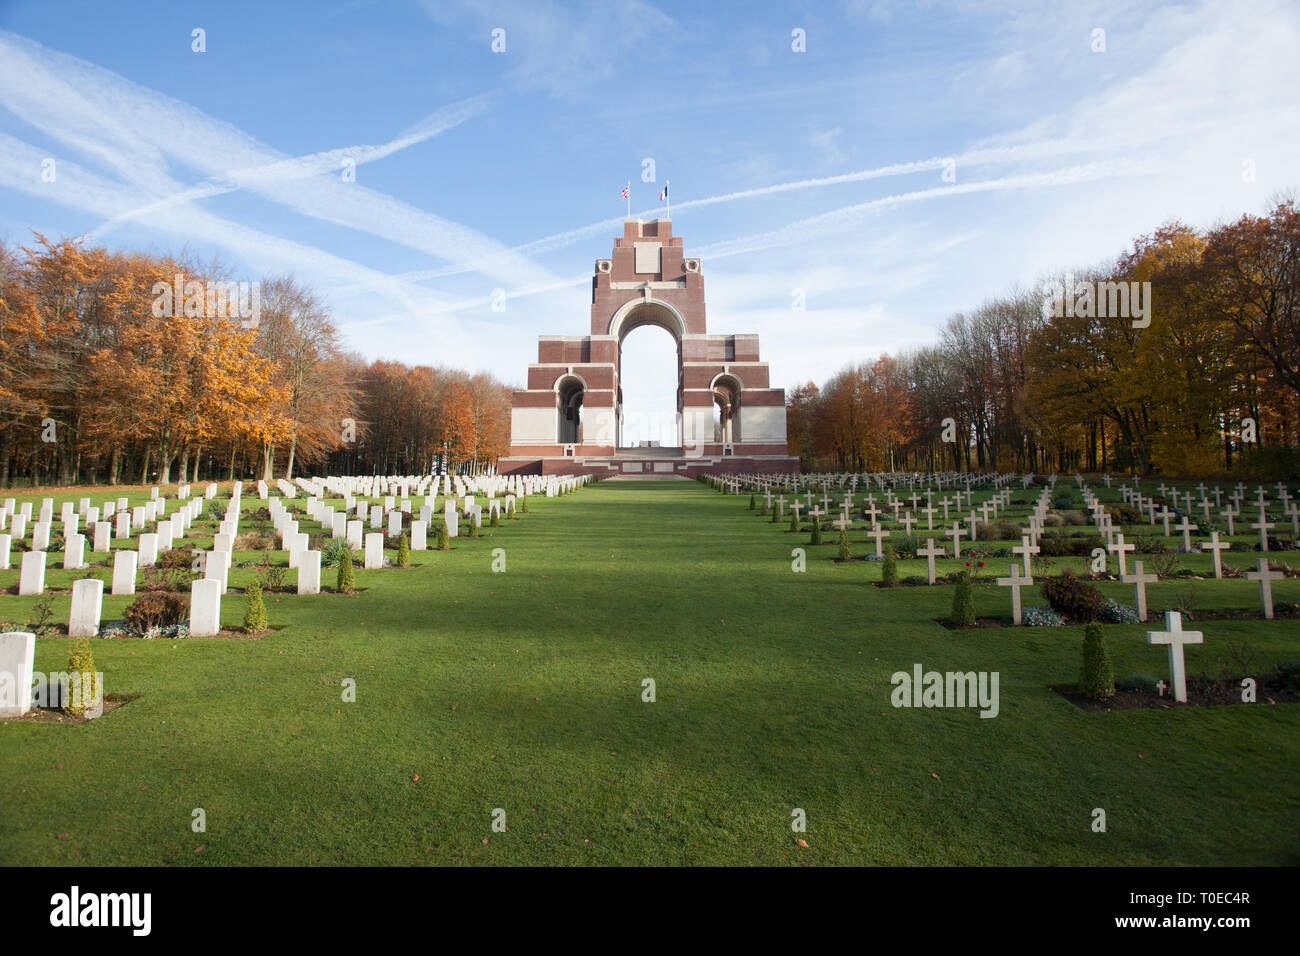 The Theipval memorial commemorates more than 72,000 troops who died in the Somme sector before 20 March 1918 and have no known graves. Stock Photo